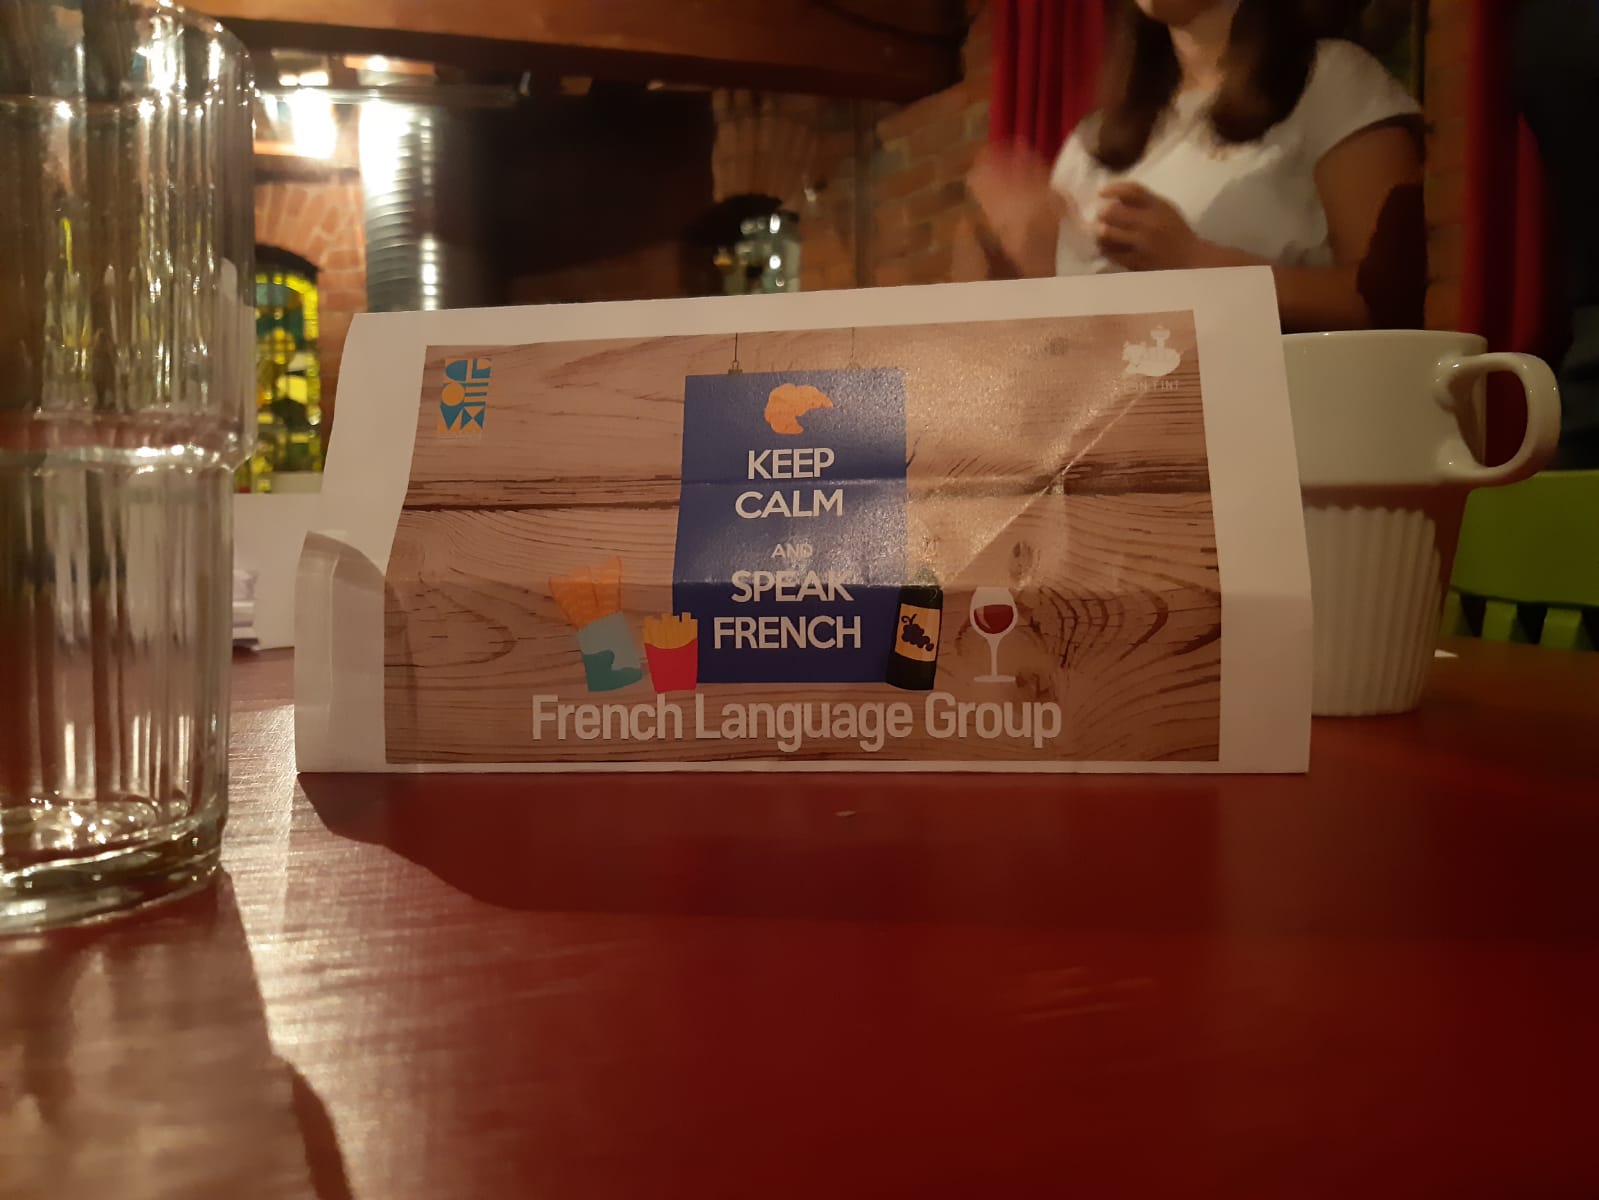 "Keep calm and speak French!"